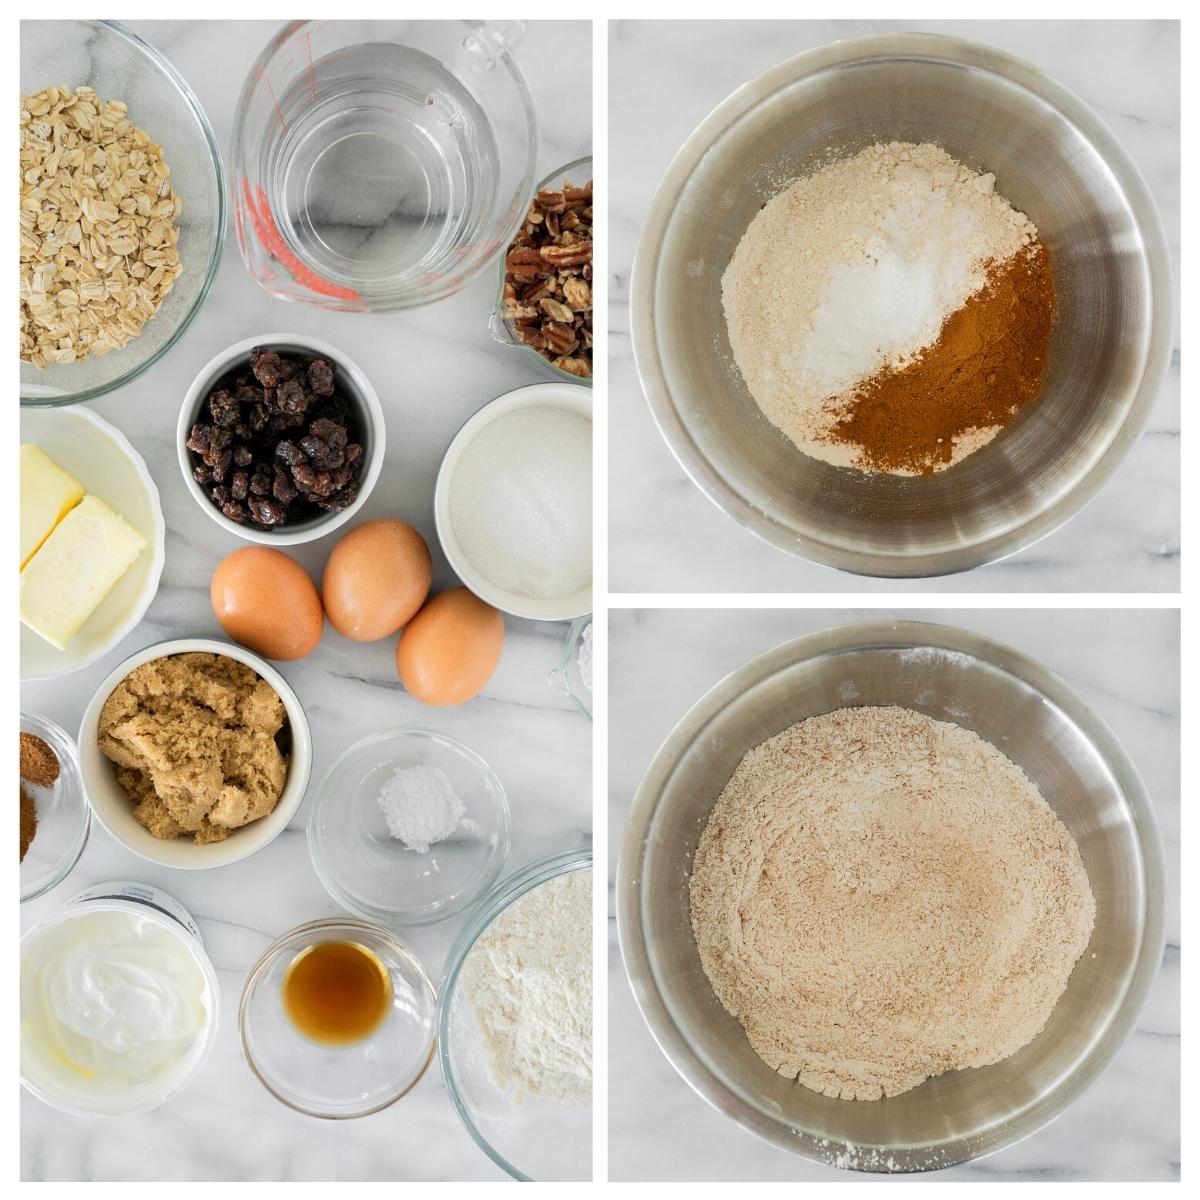 ingredients and mixing batter for oatmeal cake